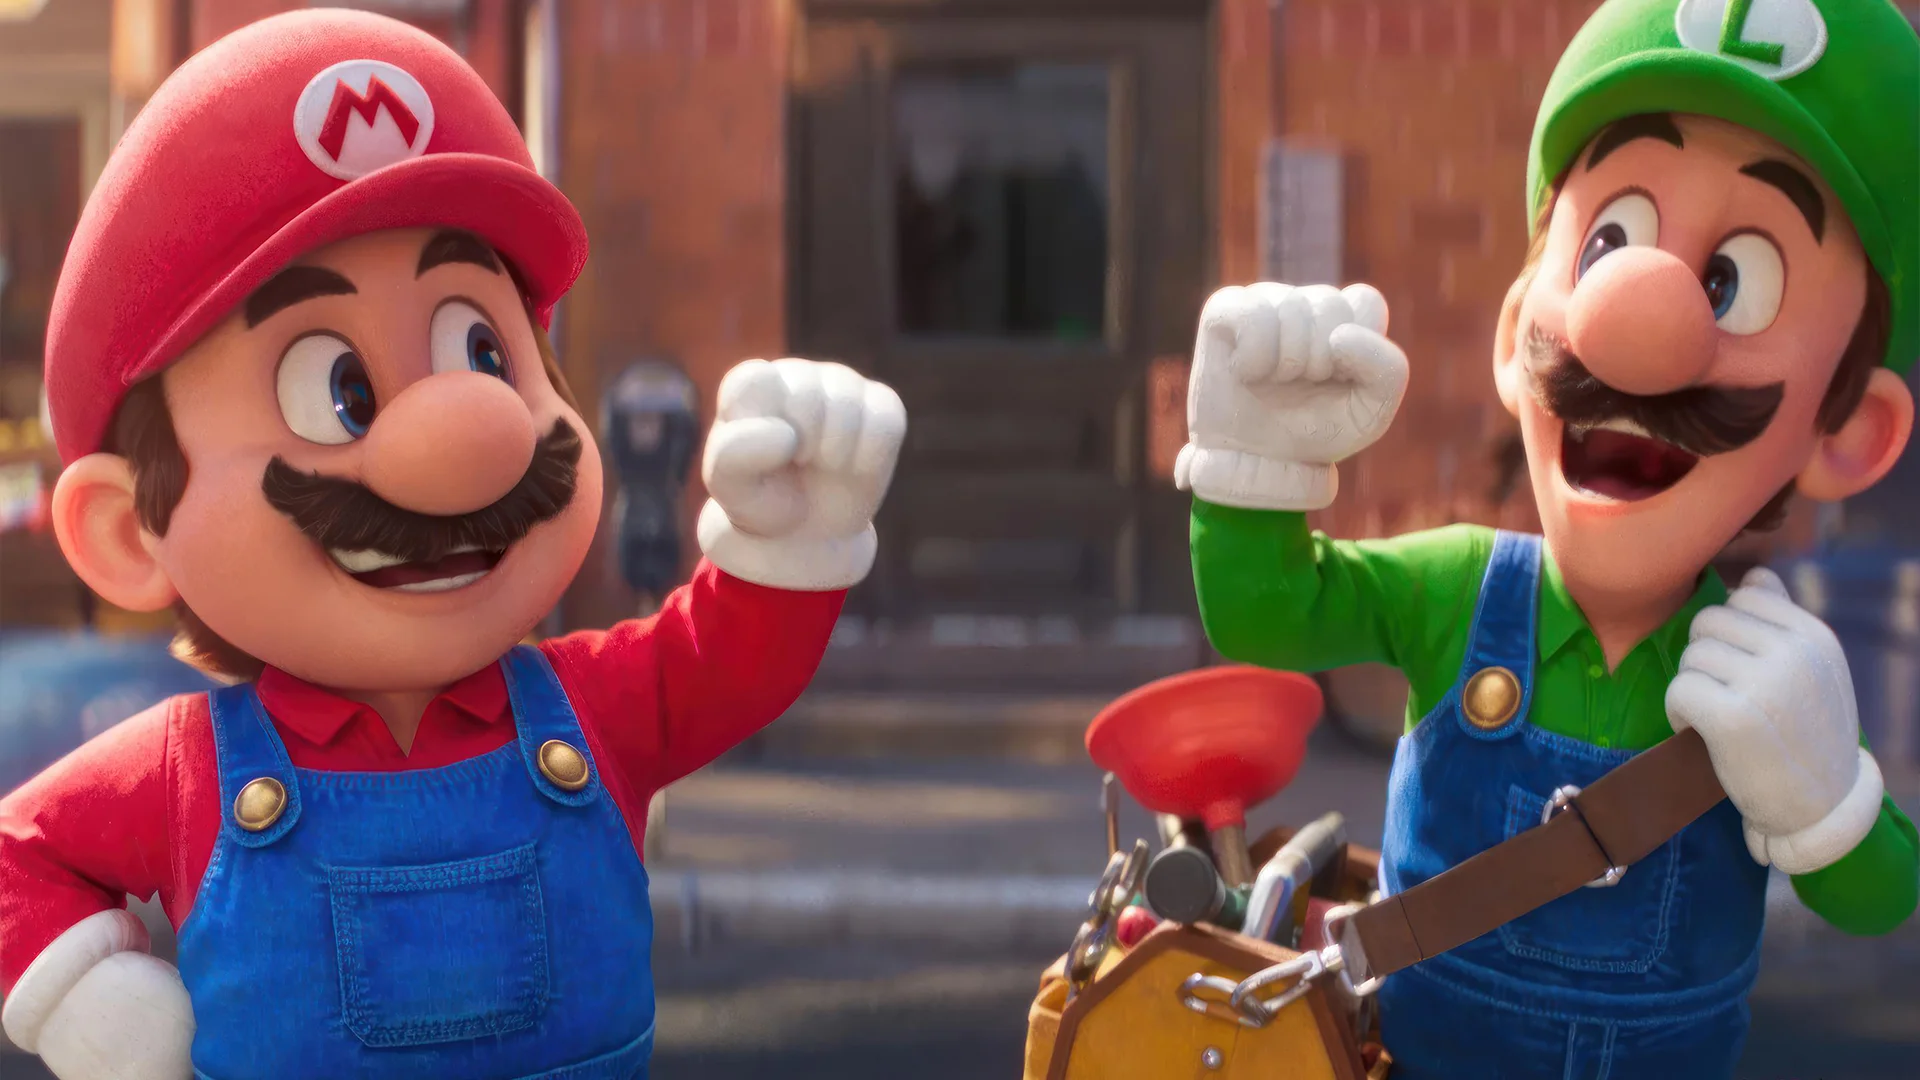 The sequel of the film adaptation of the game Super Mario received the release date